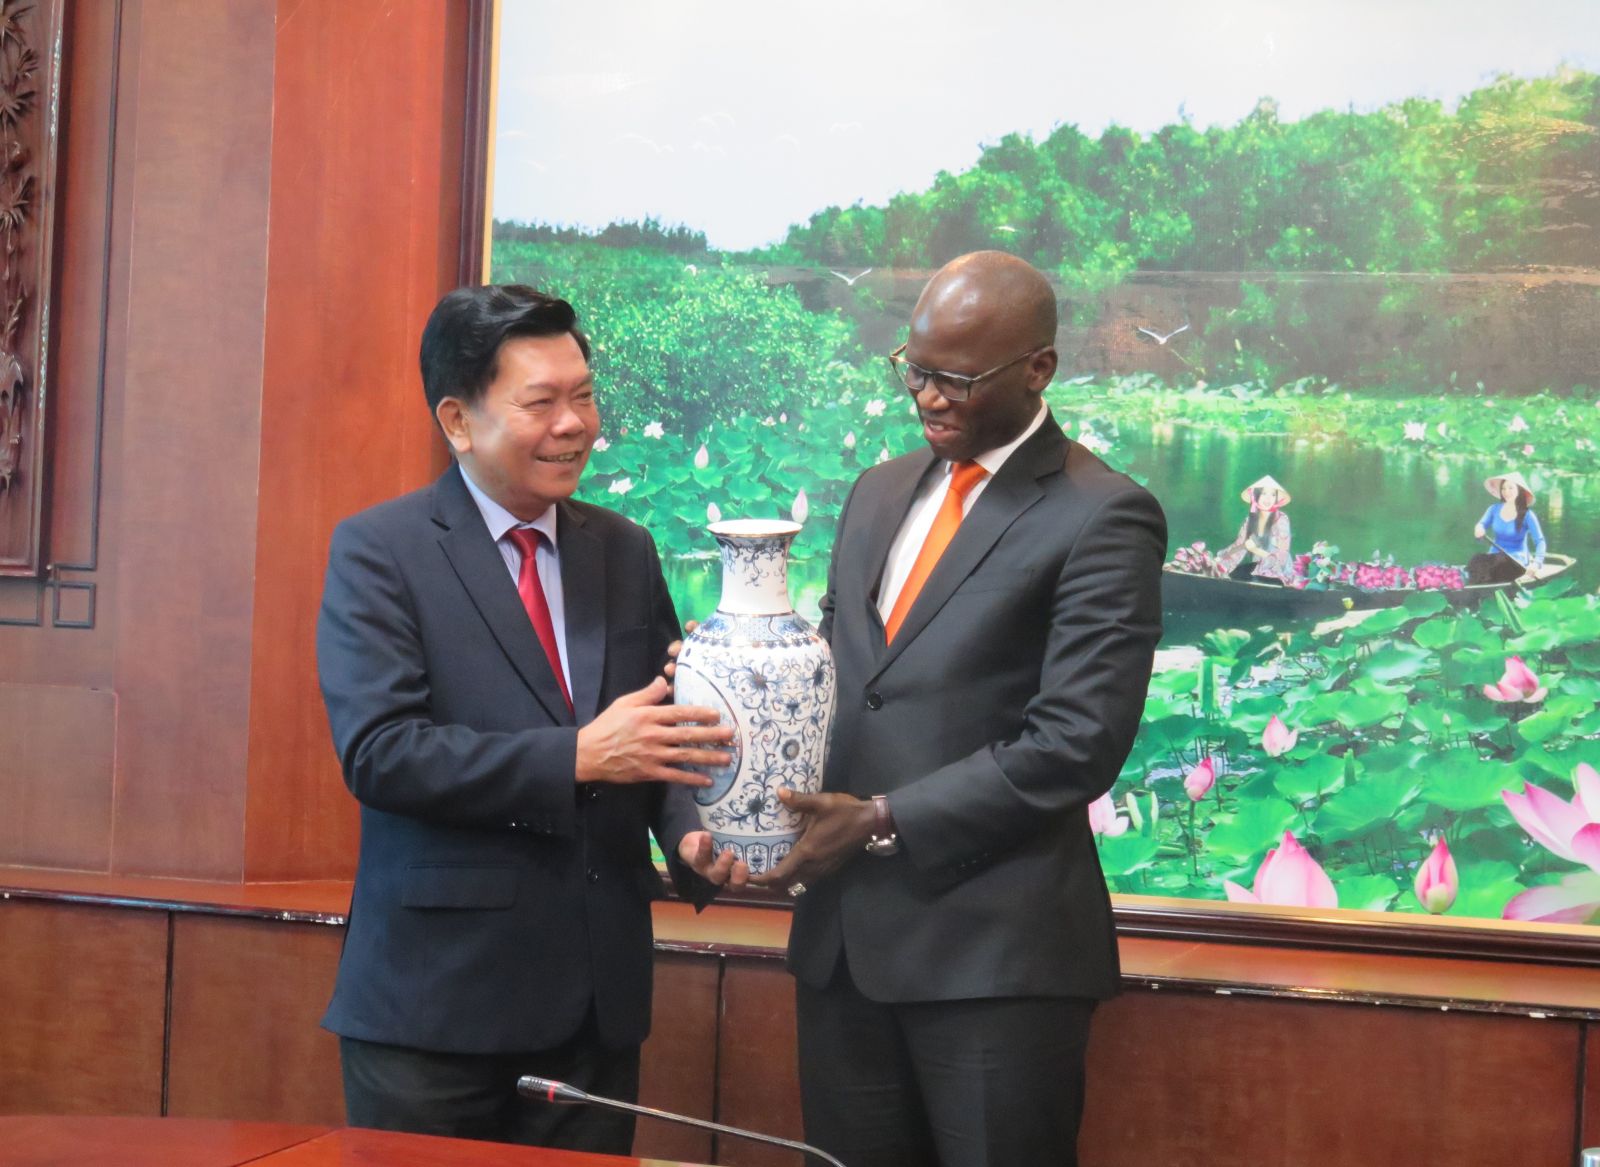 Chairman of Long An Provincial People's Committee - Tran Van Can presents gifts to Country Director, World Bank in Vietnam - Mr. Ousmane Dione